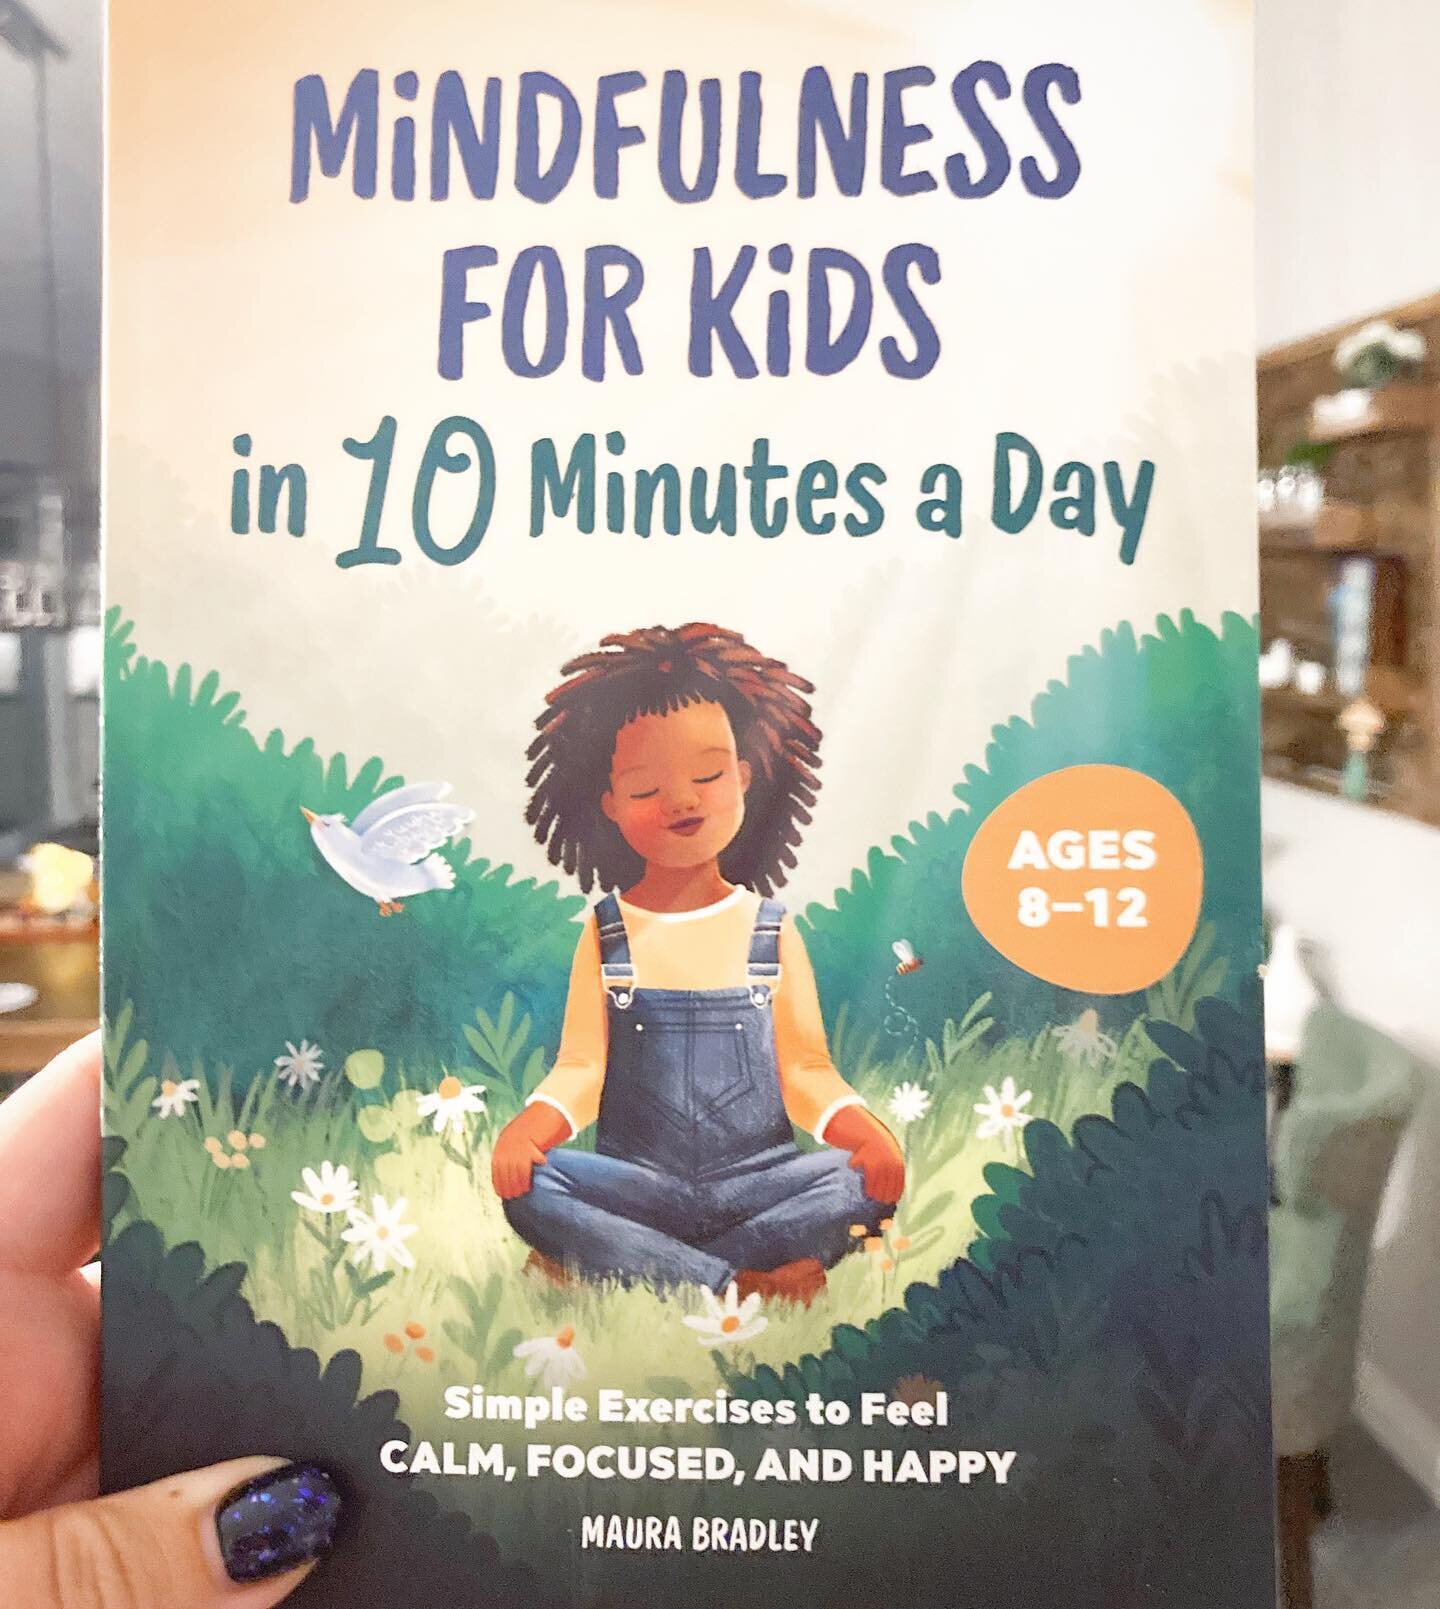 When you are looking to bring mindfulness practices into your child&rsquo;s life and don&rsquo;t know where to start&hellip;. Pick up @maura.l.bradley new book! It&rsquo;s as easy as 10 minutes exercises a day. She separates the book into exercises a